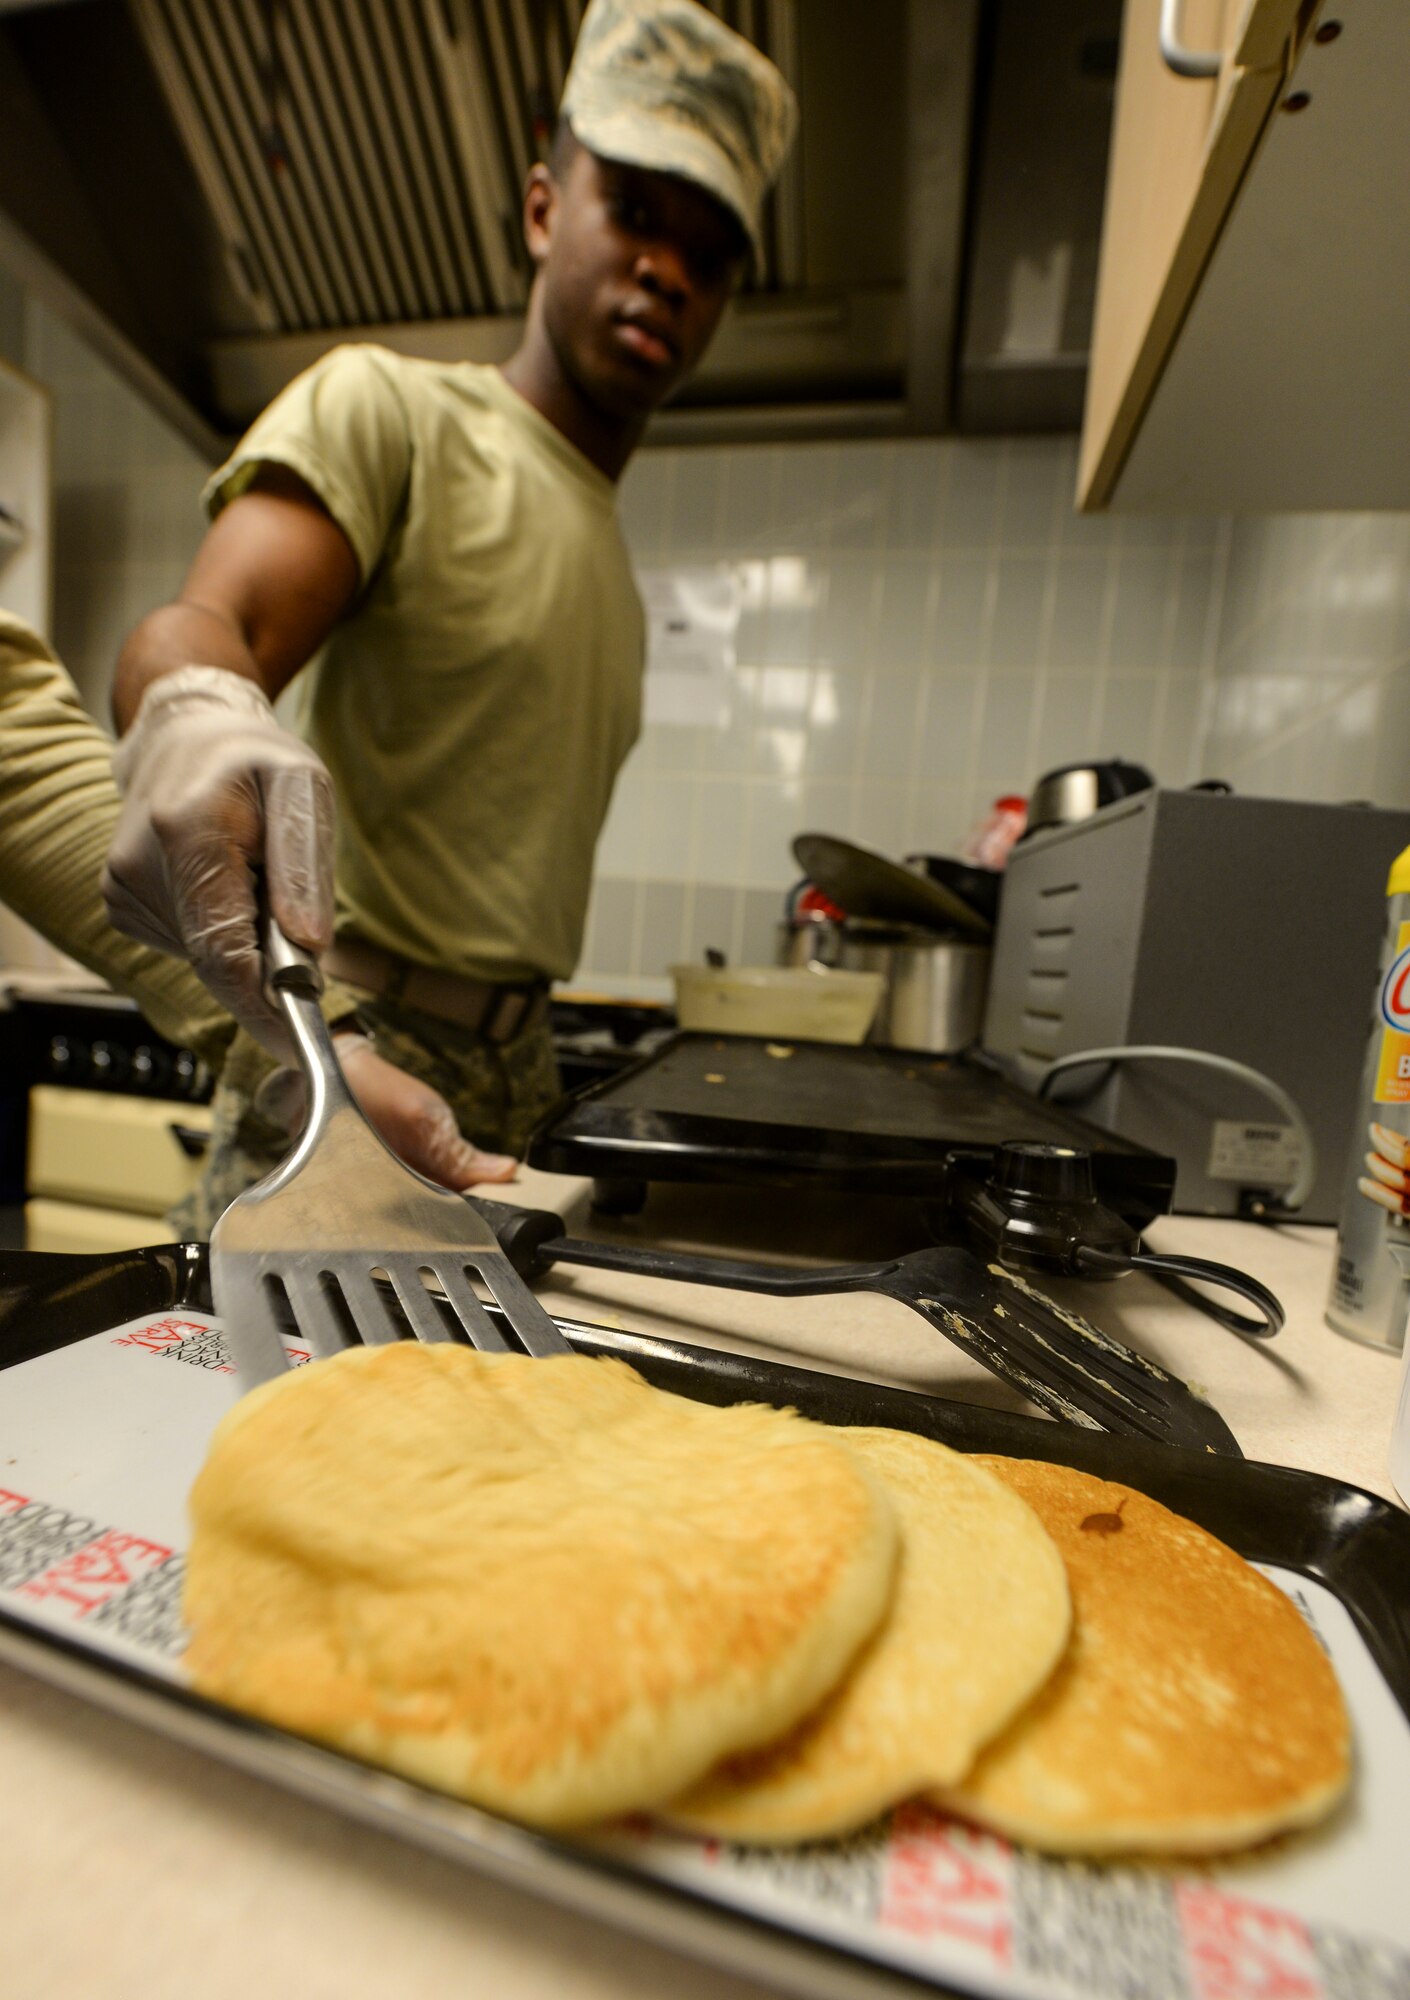 U.S. Air Force Airman 1st Class DeSean Gunter, 100th Communications Squadron client systems technician, prepares pancakes in the base chapel March 21, 2017, on RAF Mildenhall, England. Volunteers and members of the Airmen Committed to Excellence council joined together to make breakfast for junior enlisted personnel across base. (U.S. Air Force photo by Staff Sgt. Micaiah Anthony)